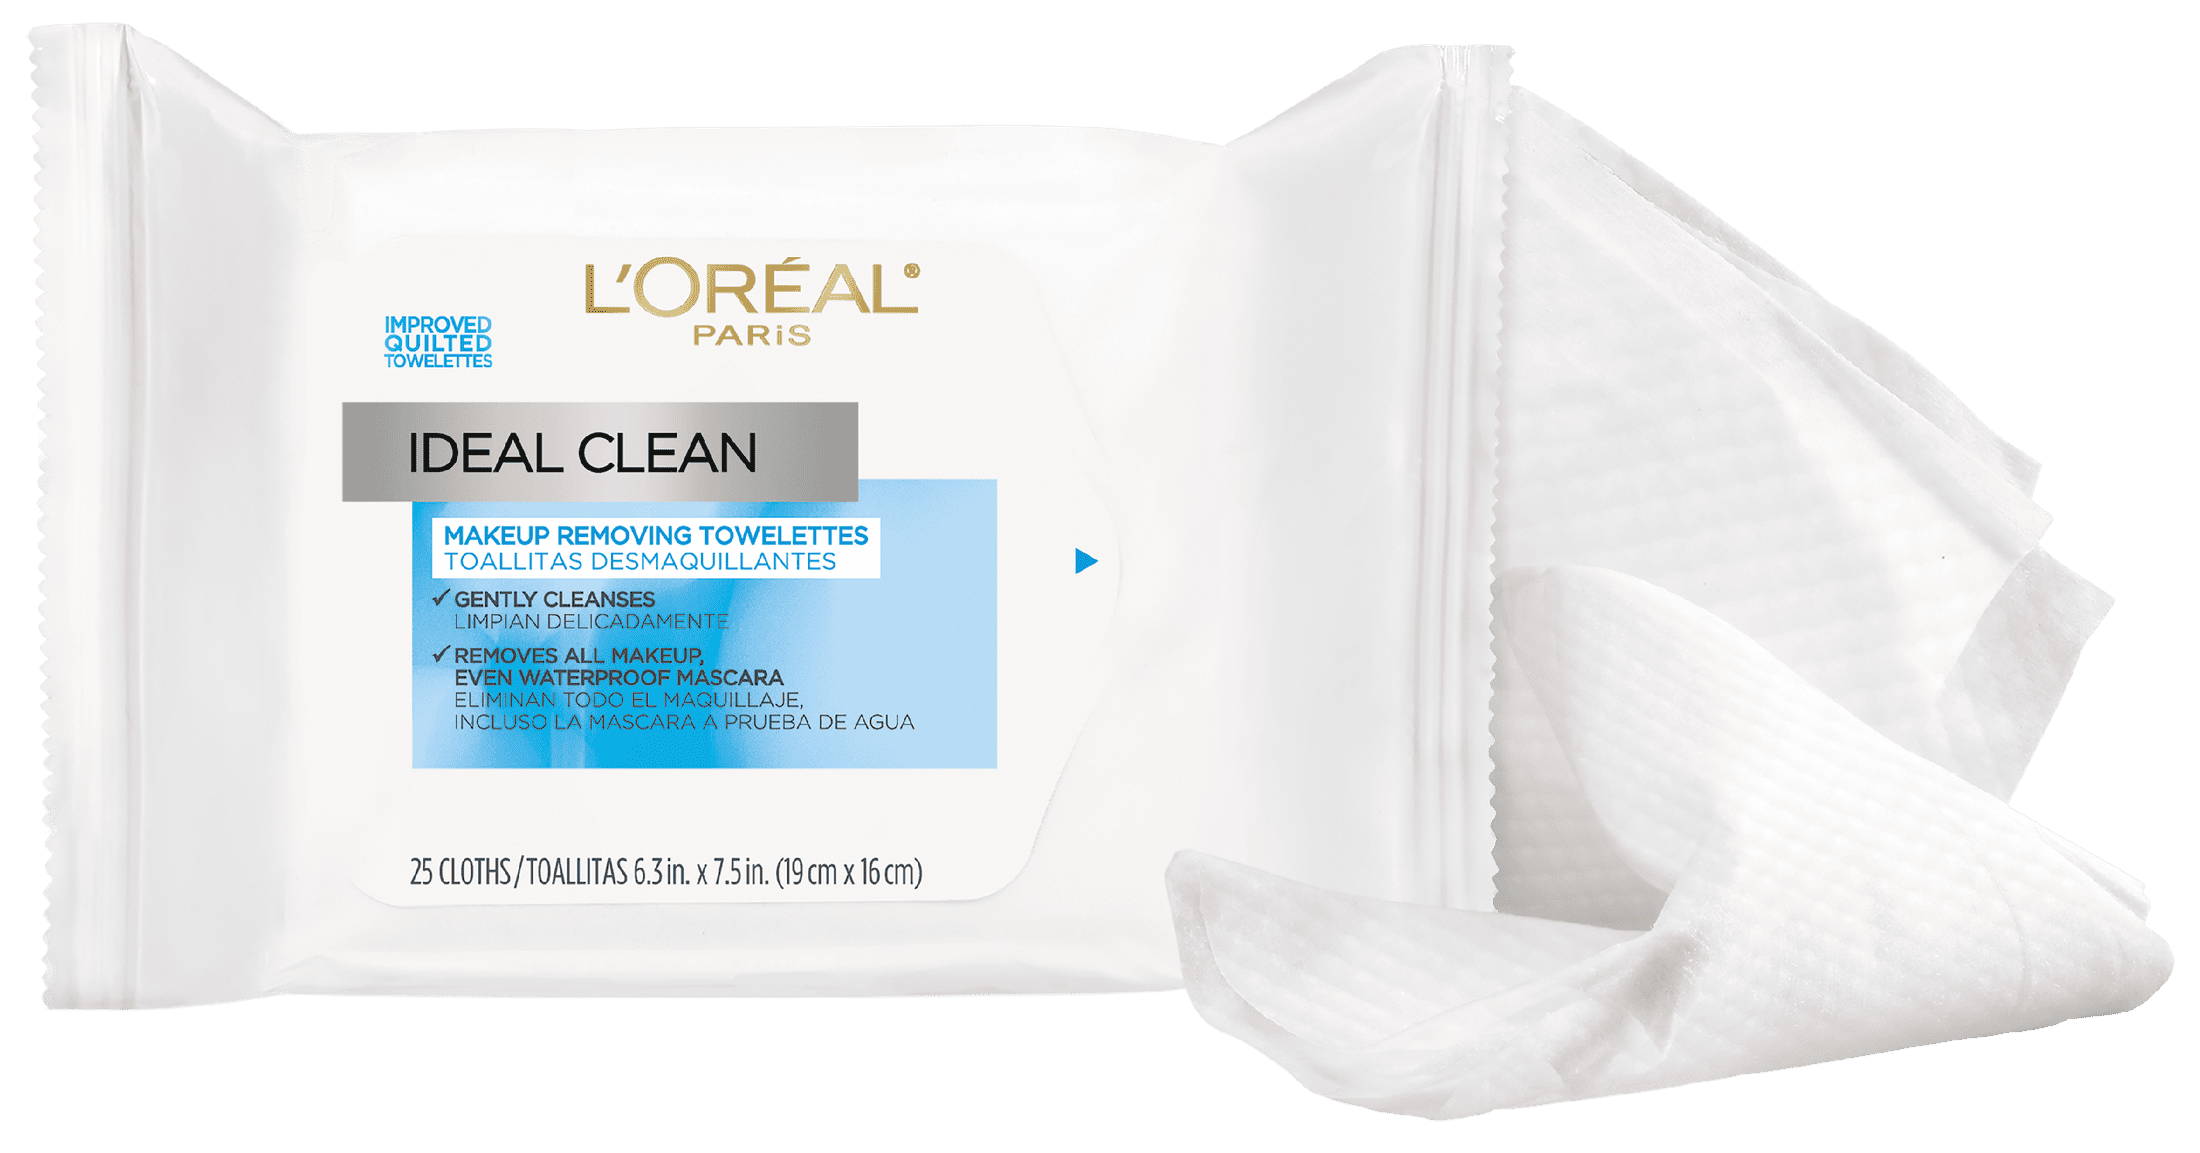 MP bison stemning L'Oreal Paris Ideal Clean Makeup Removing Towelettes Gently Cleanses -  Walmart.com